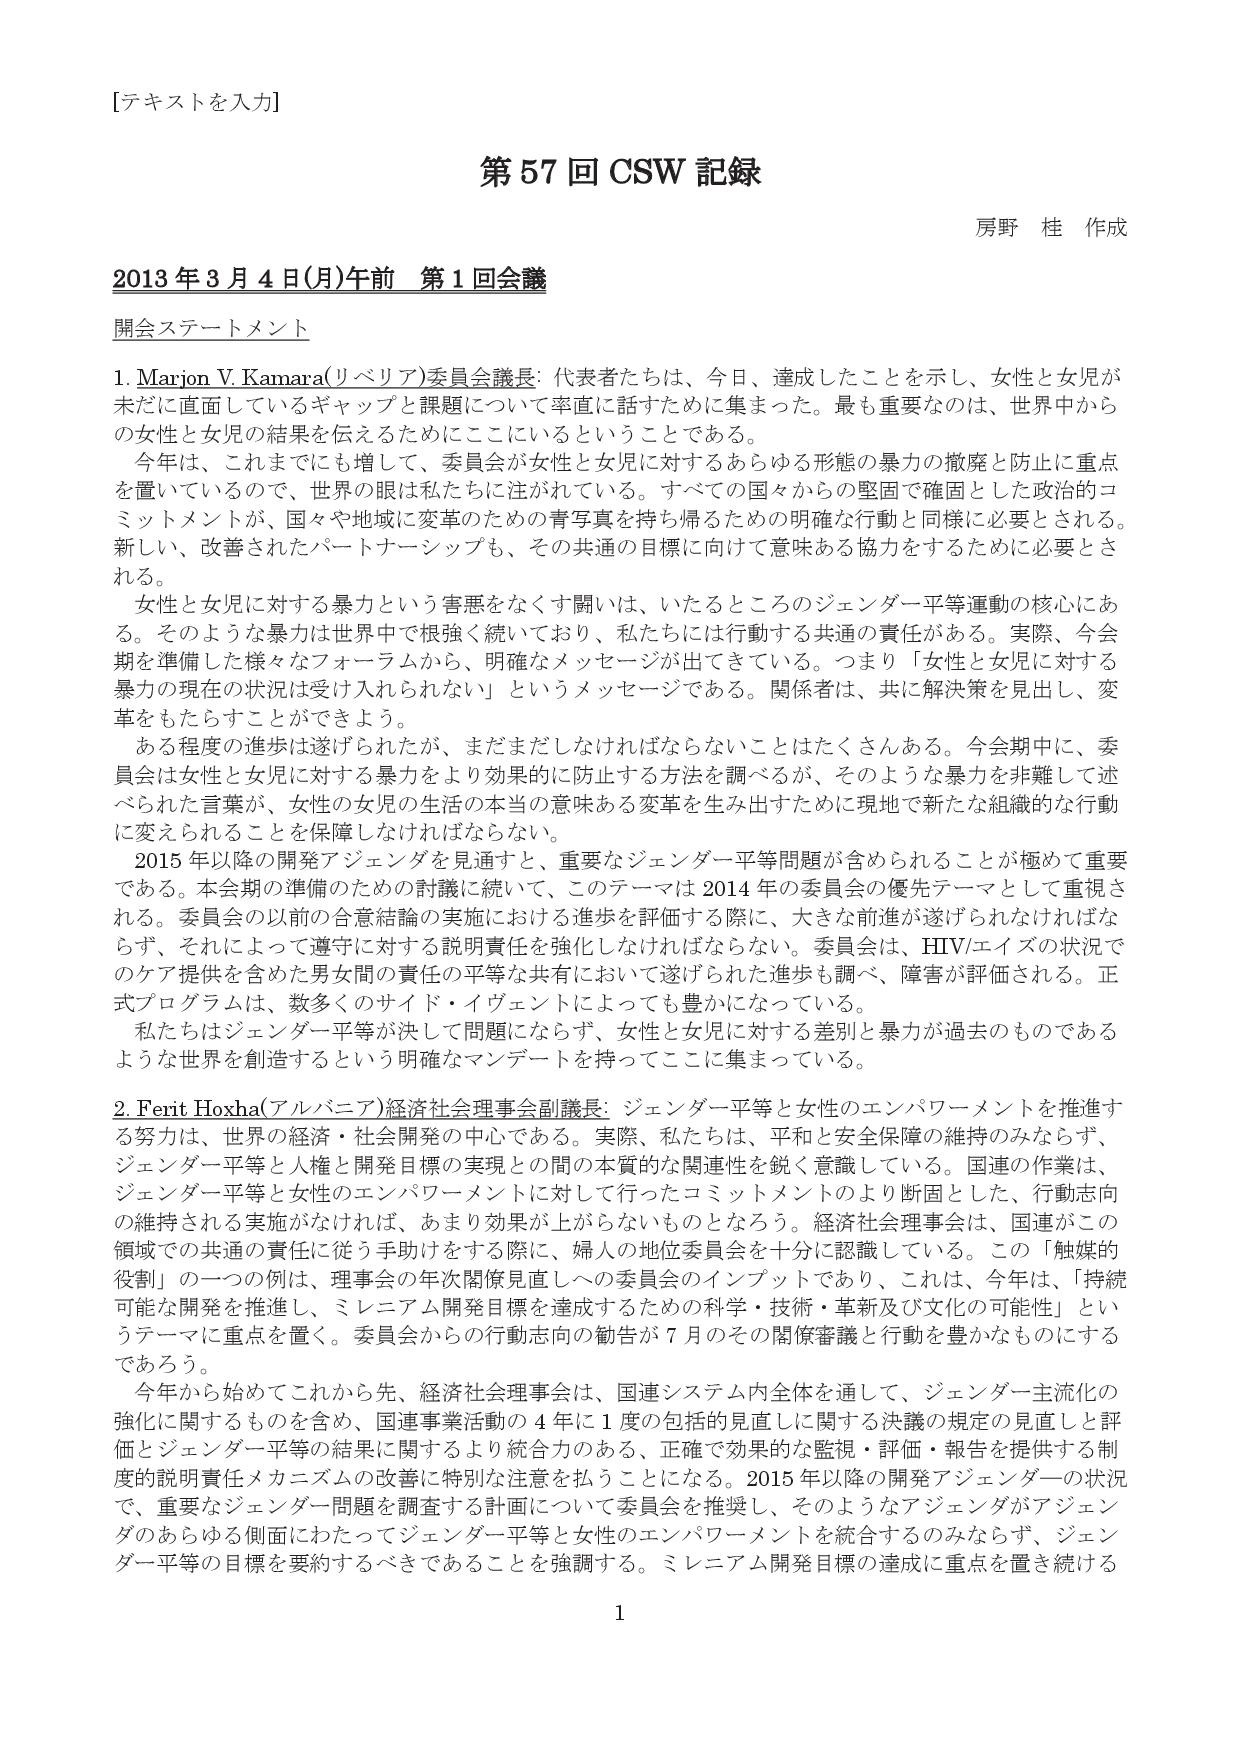 2013 CSW57記録４月１９日